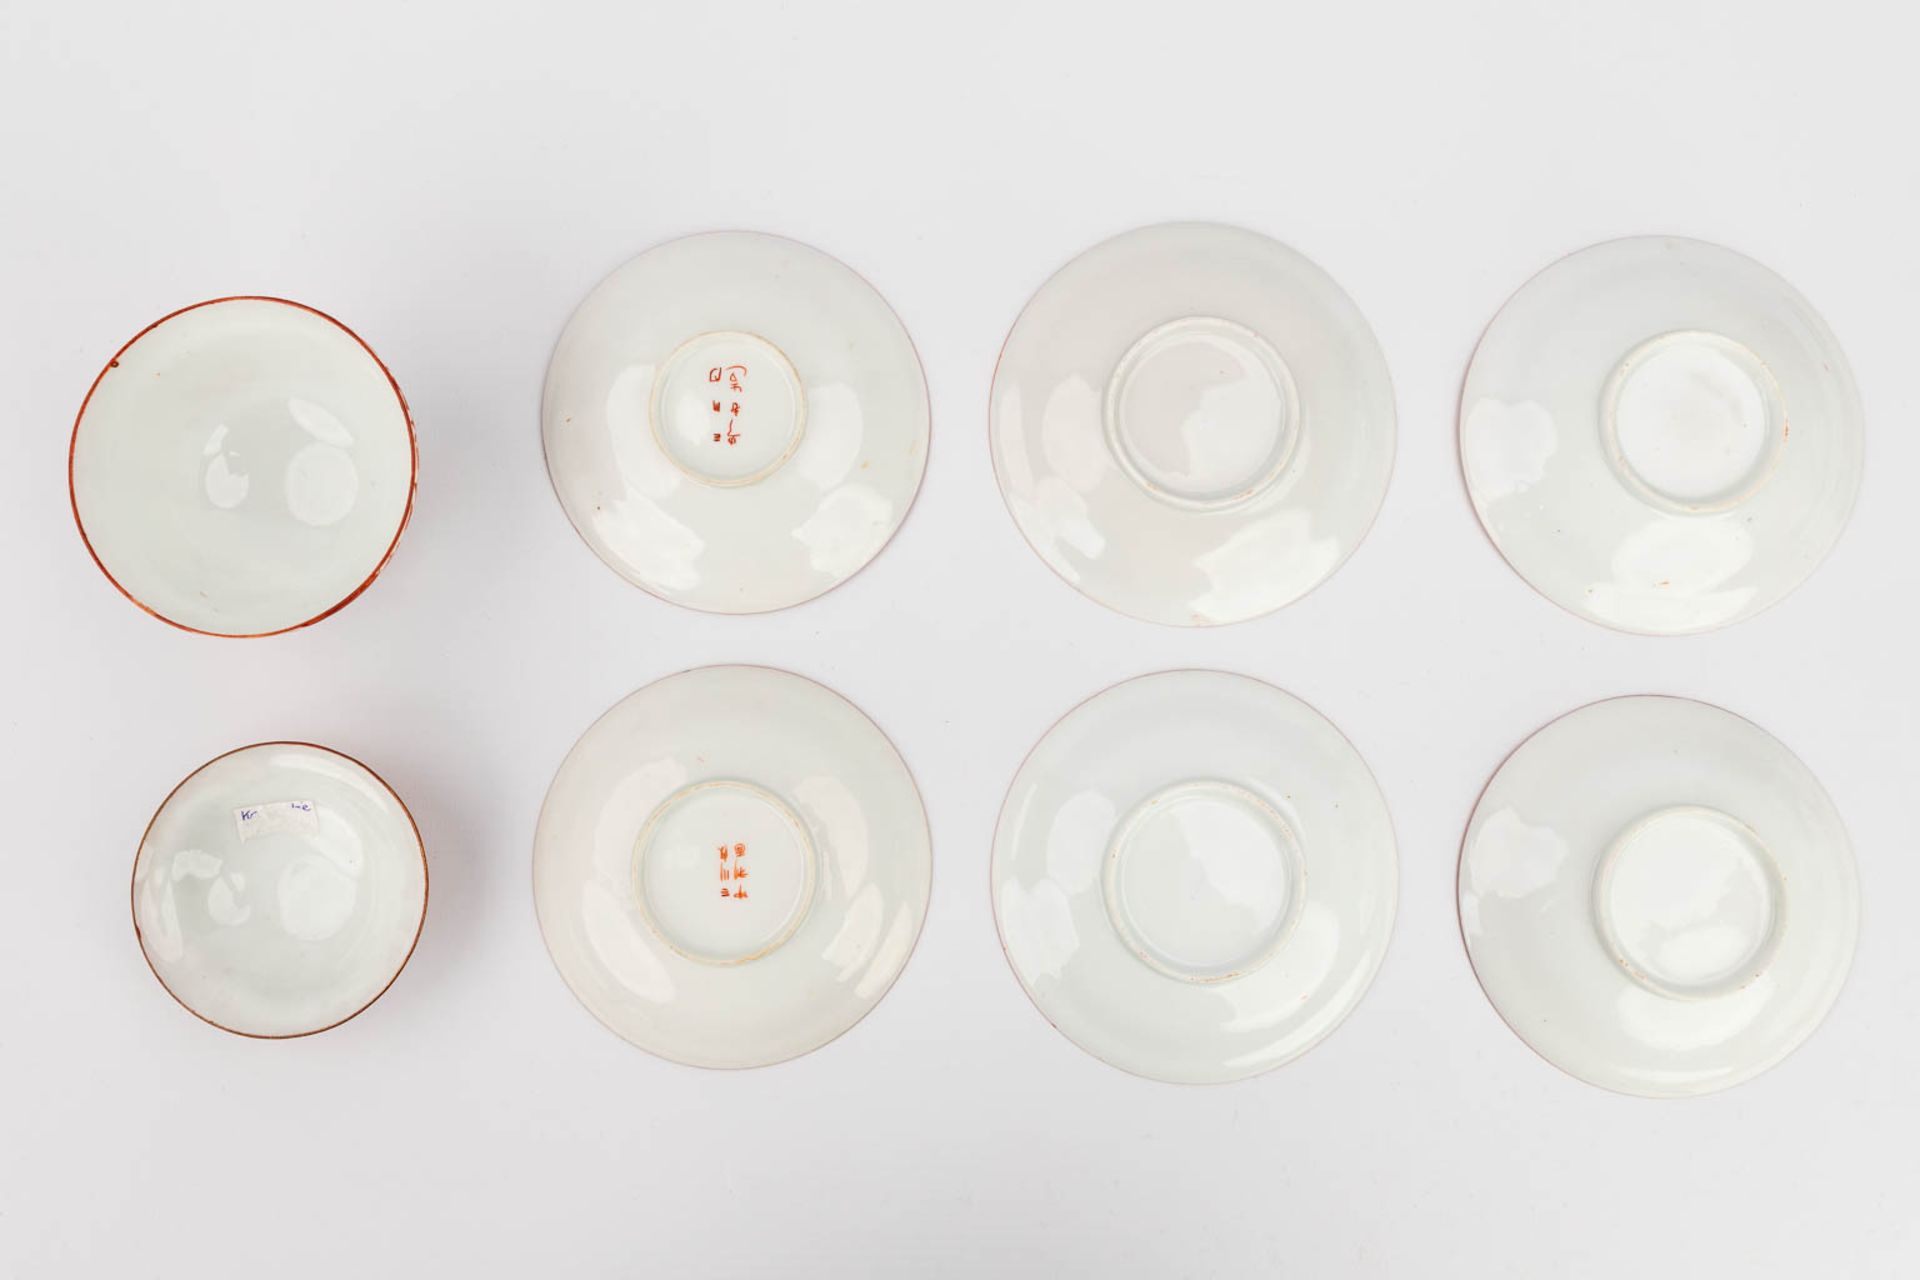 A large collection of bowls and saucers, eggshell porcelain, Japan, 20th C. (H:9 x D:9 cm) - Image 16 of 24